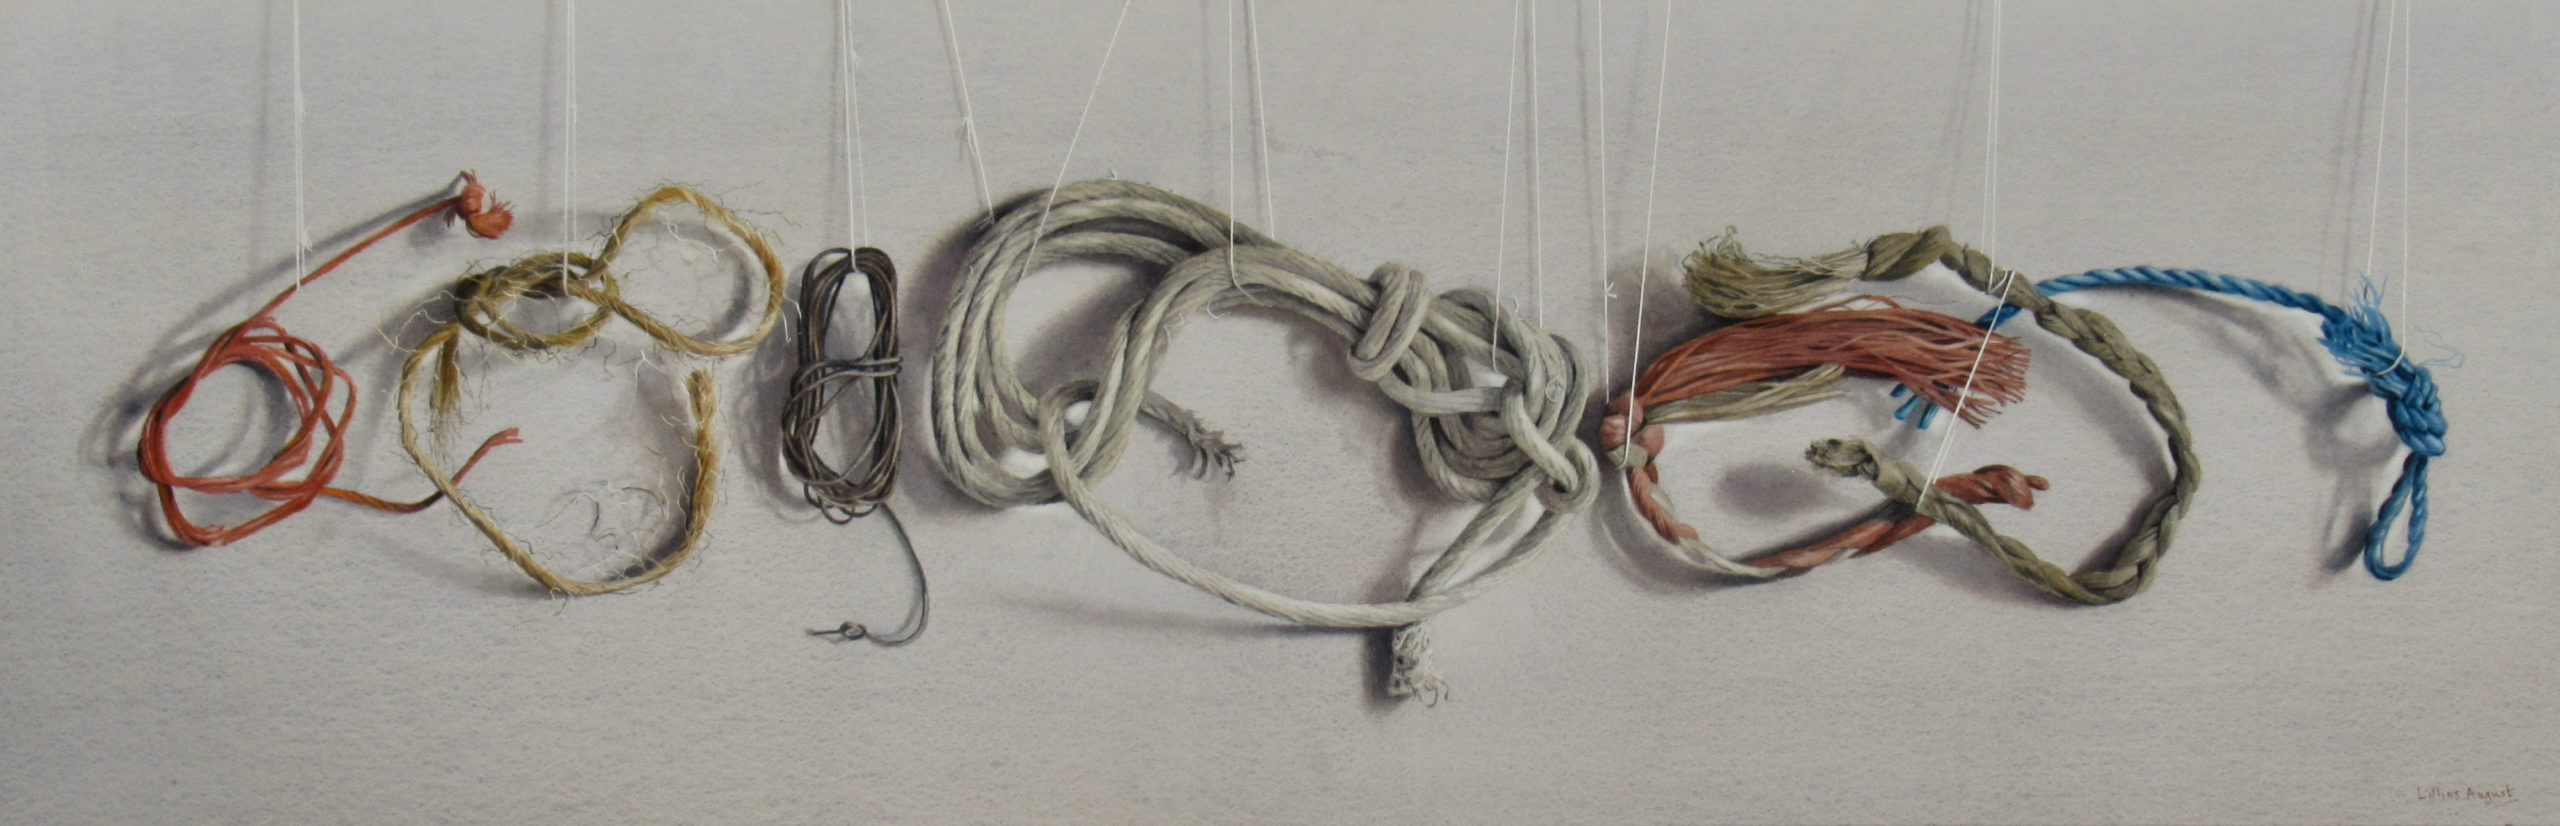 Tied up in knots 29 x 91cm